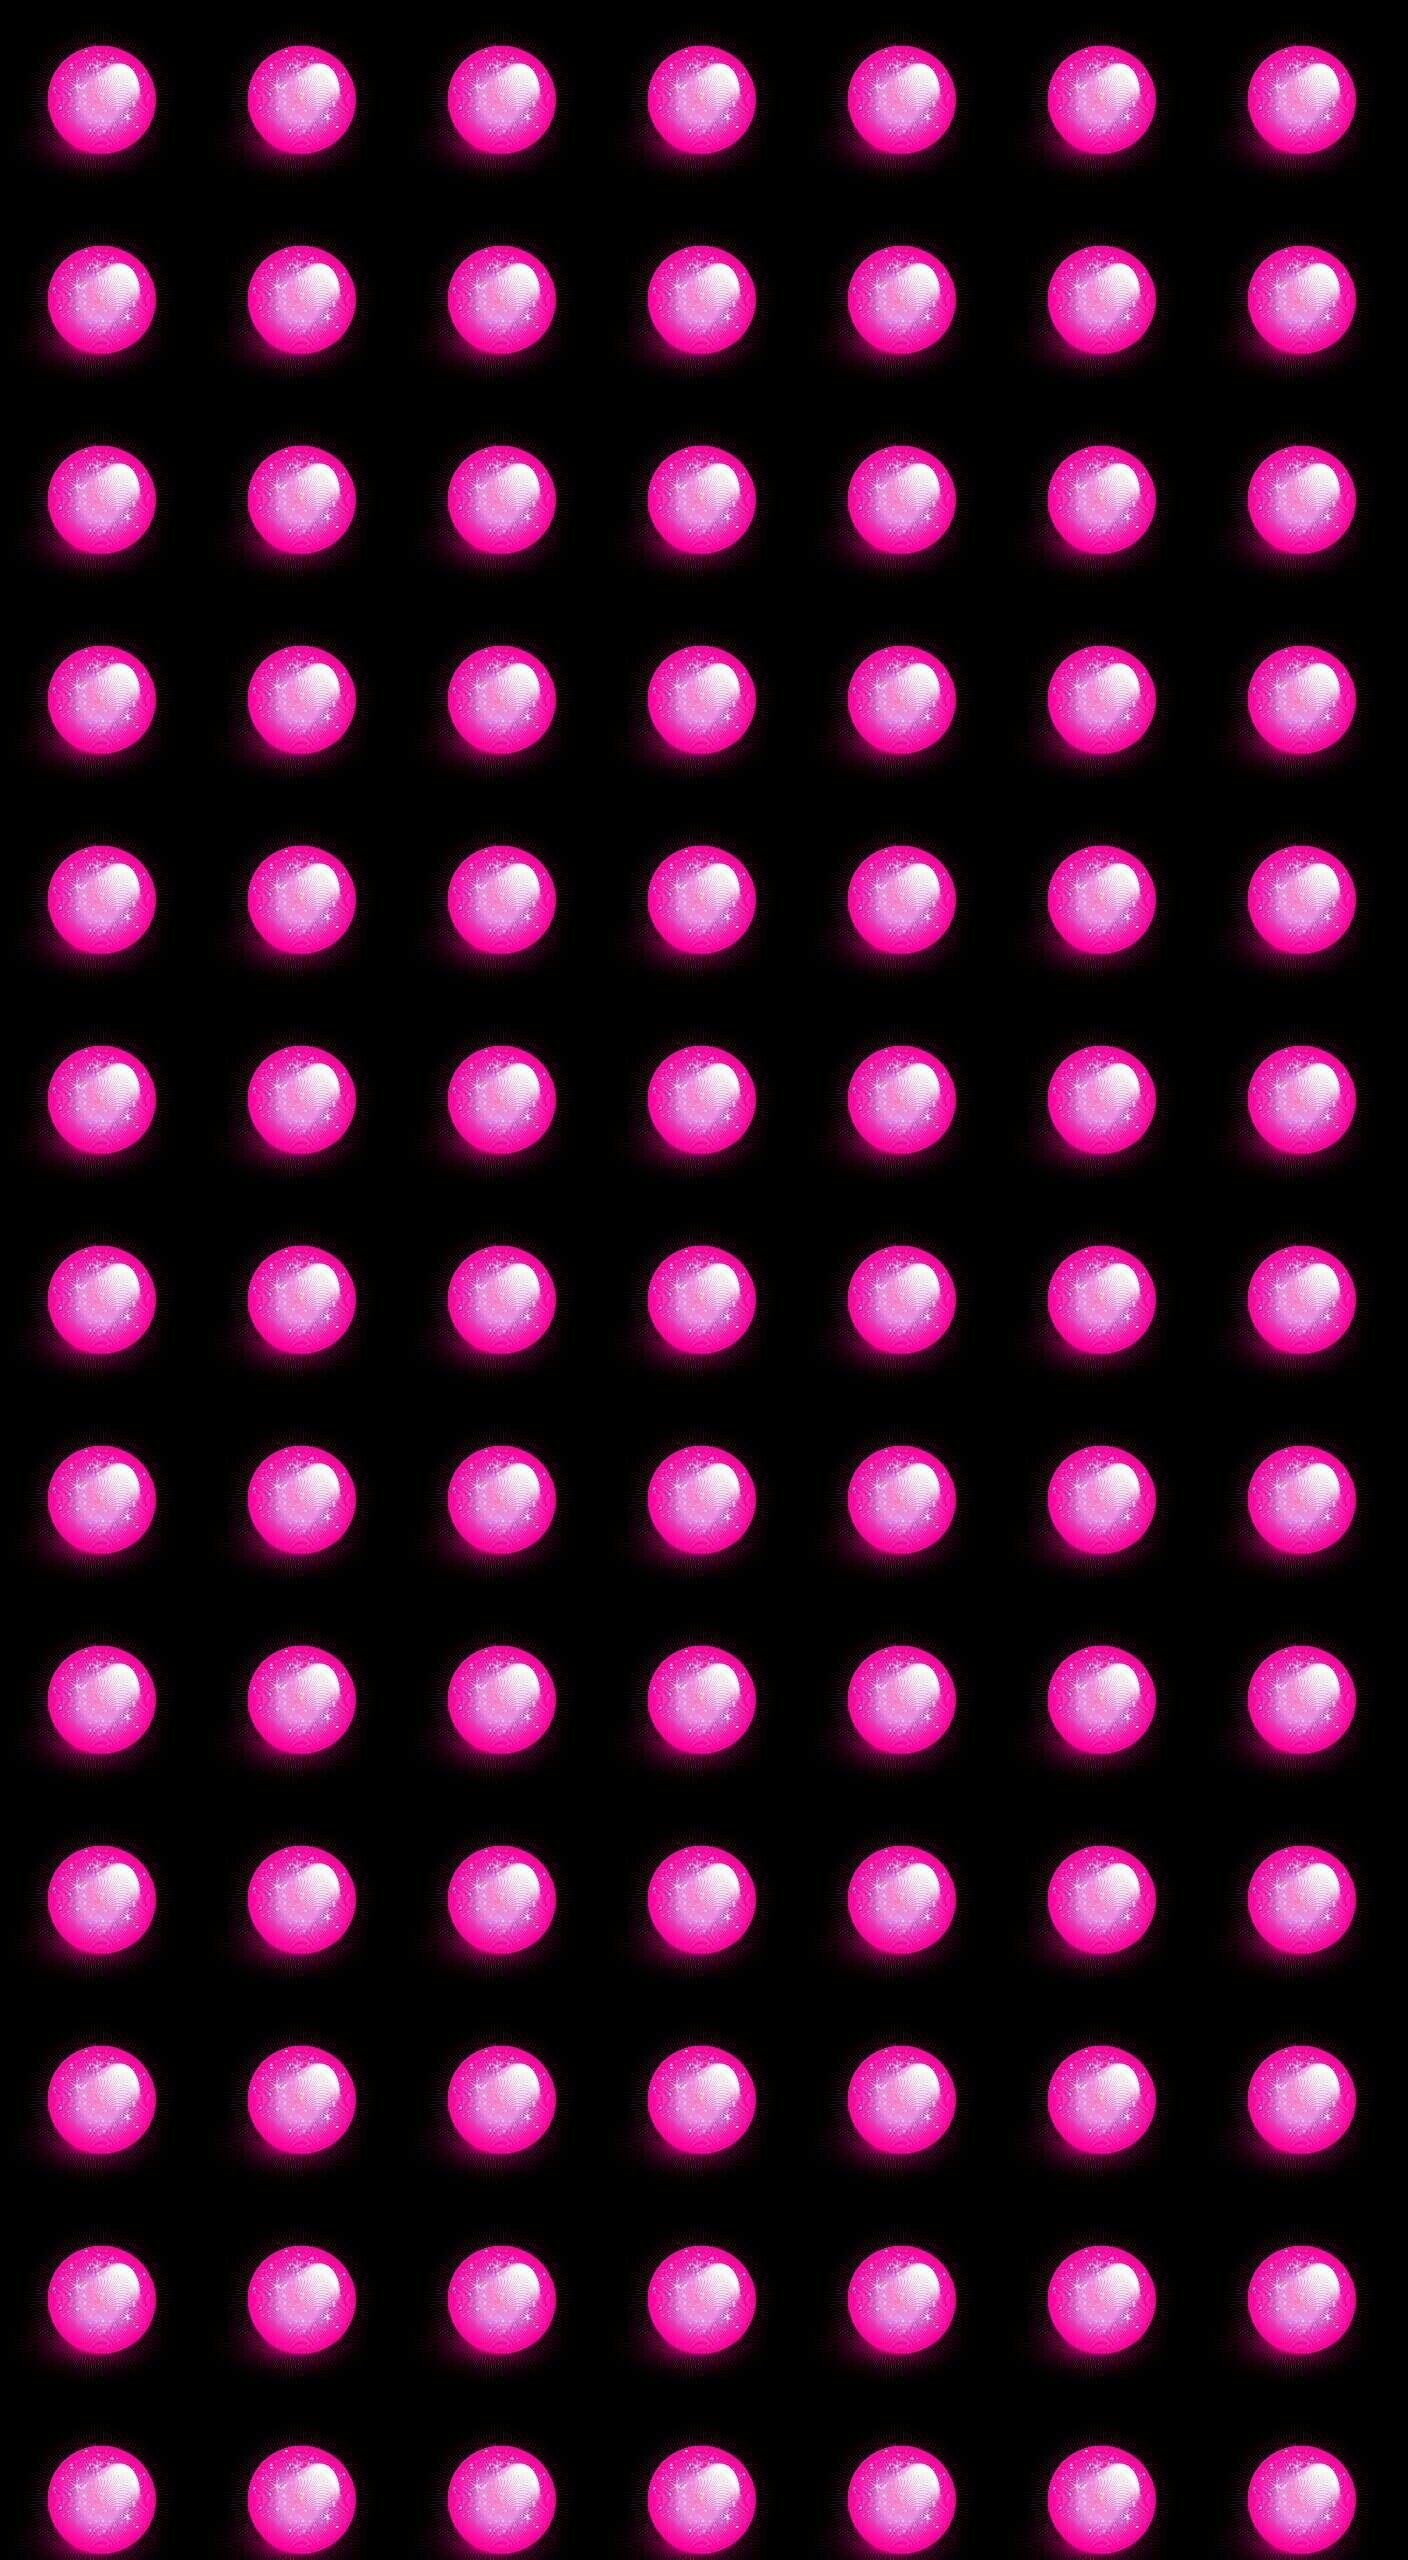 Pink dots on black background. Cute Unique Phone Background